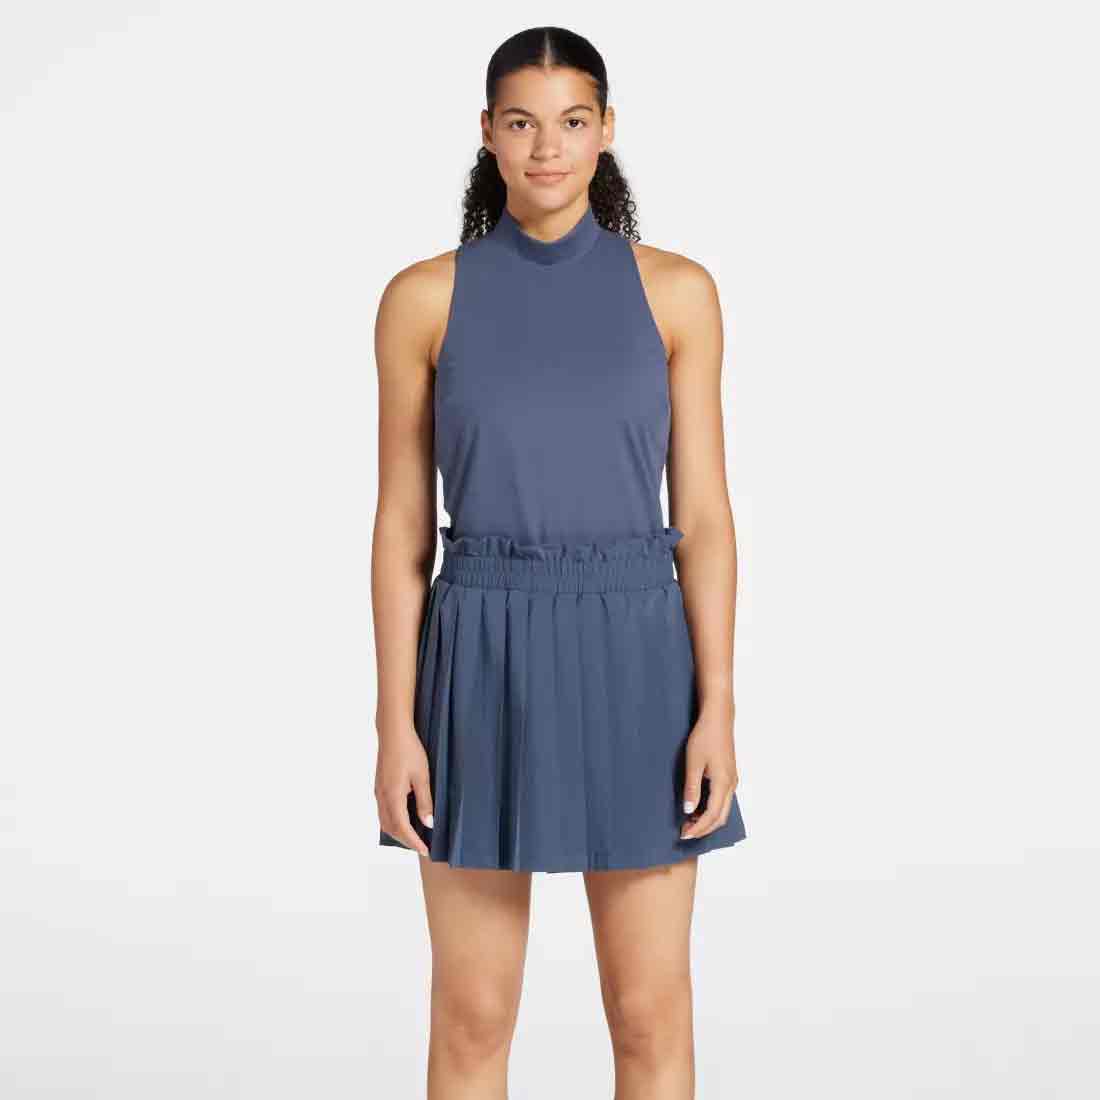 Golf dresses: These 5 picks are both flattering and fashionable